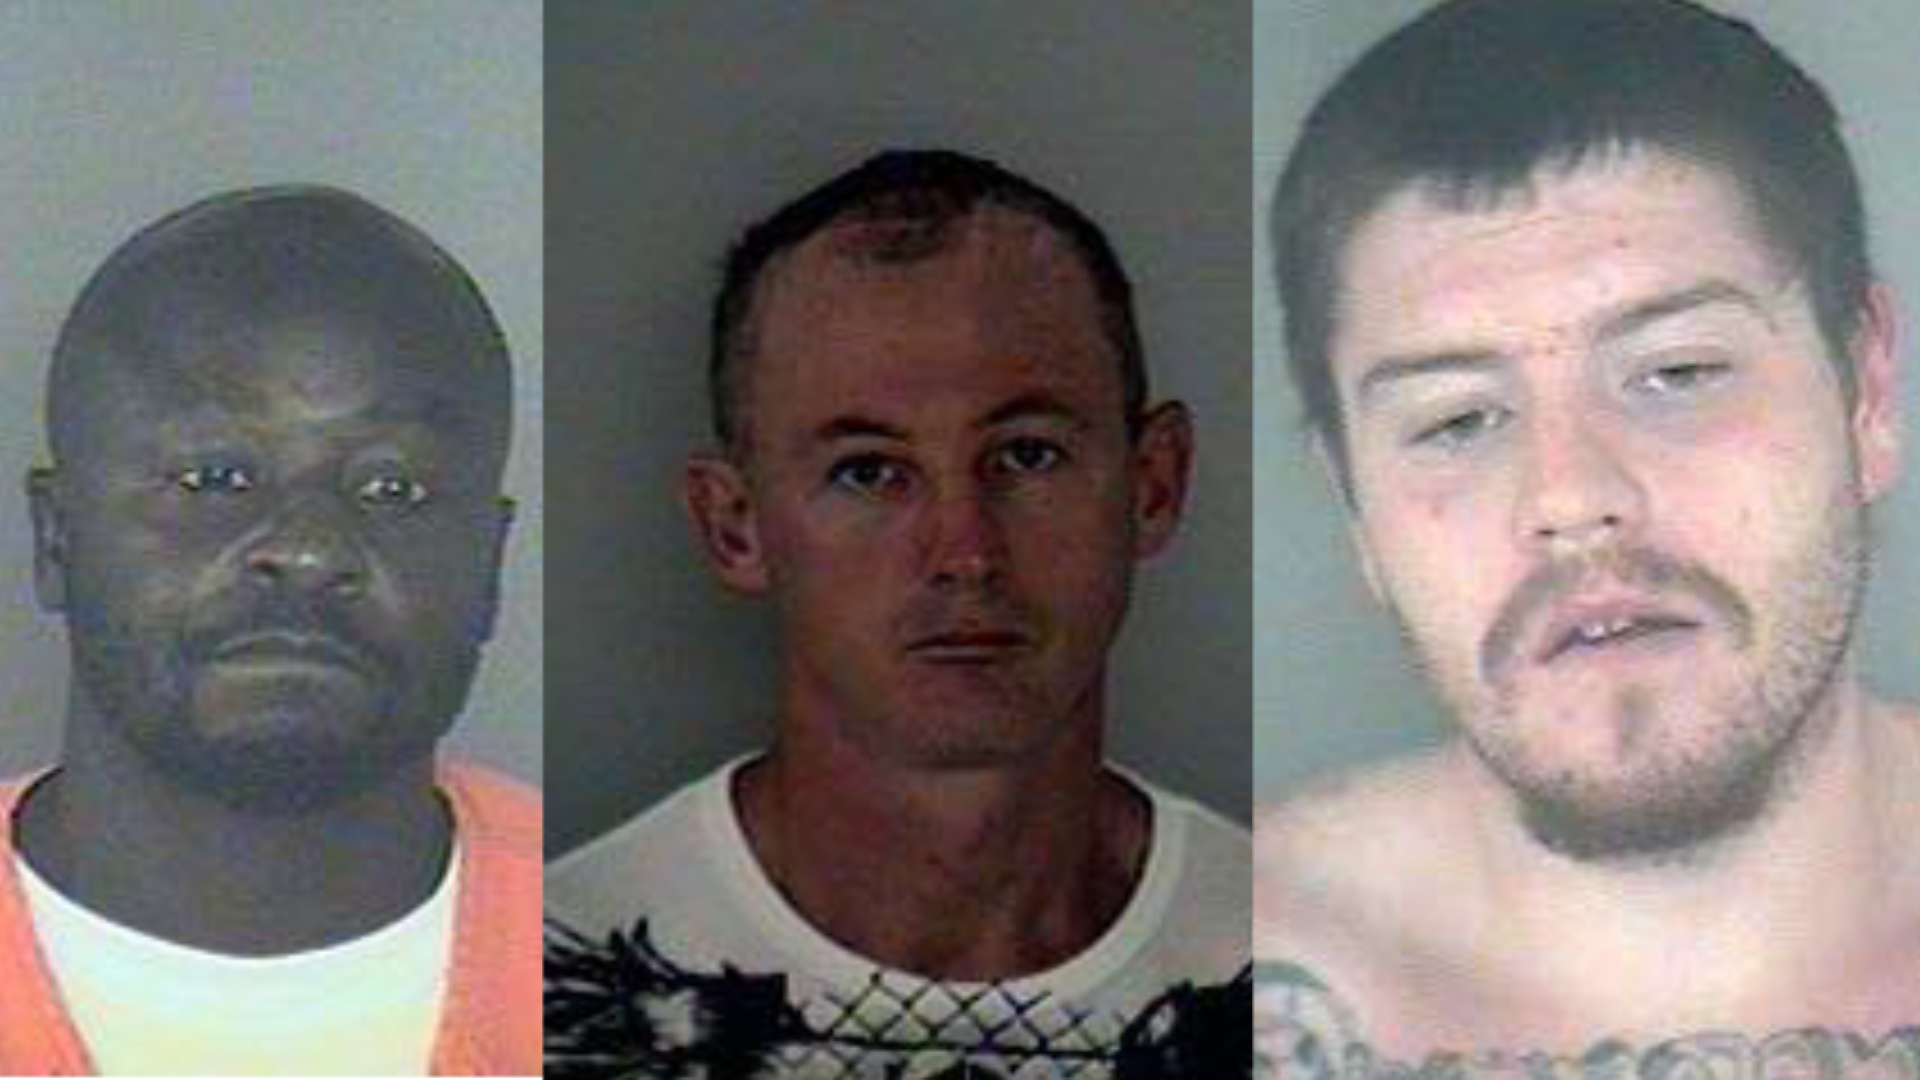 Florida panhandle county closes schools after 3 inmates escape jail